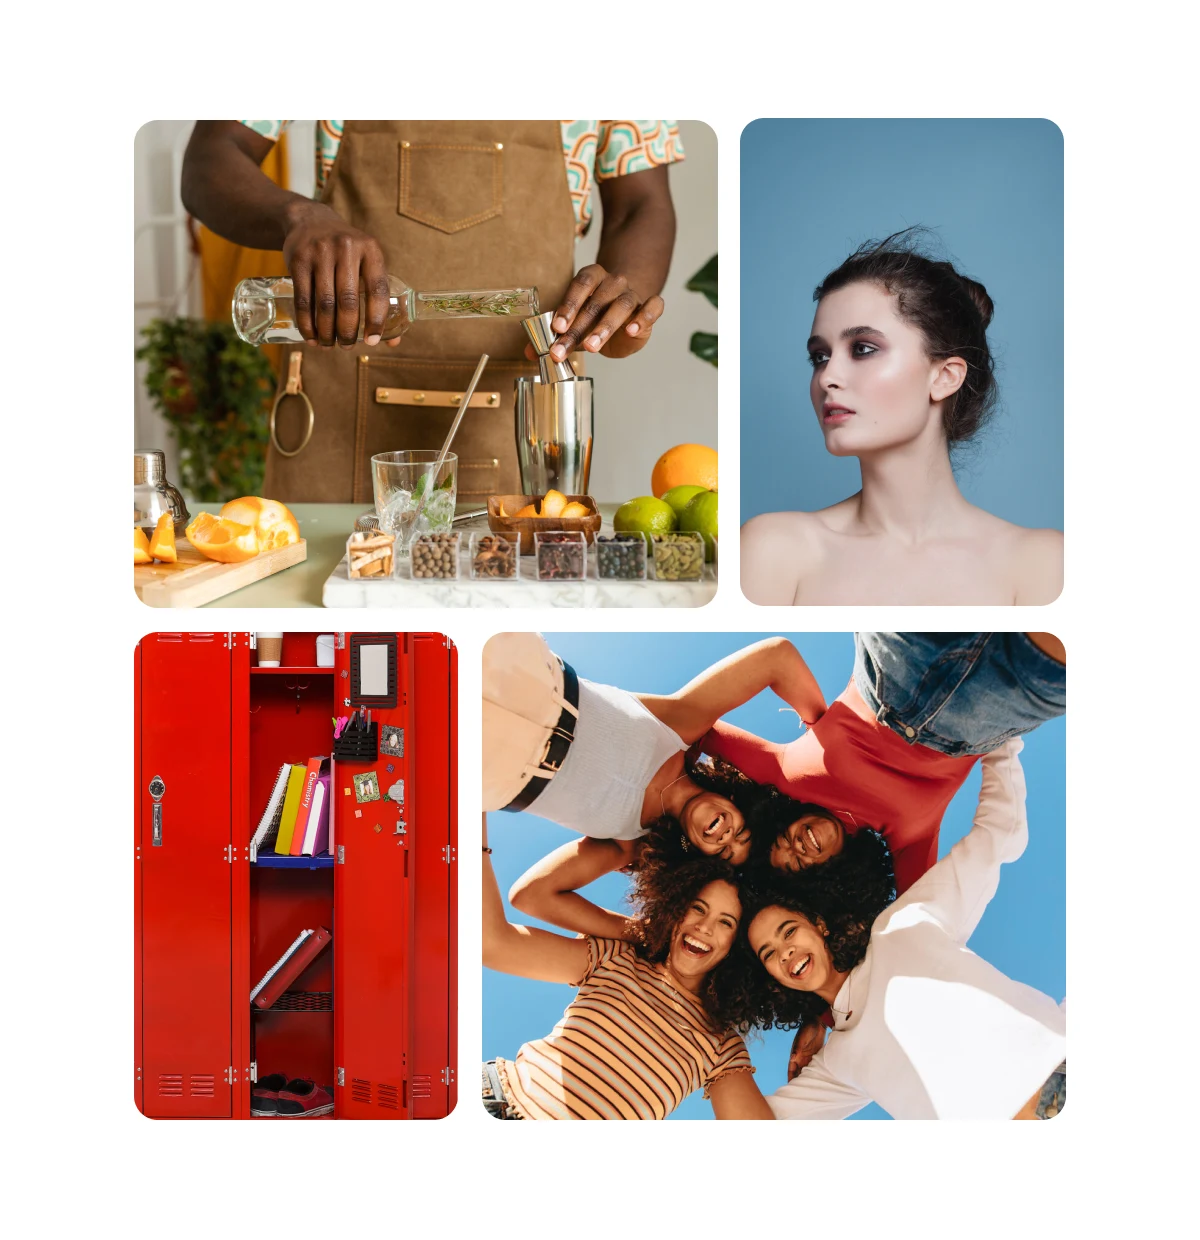 Pin grid featuring Black bartender mixing a drink, white woman with grungy makeup, a red locker, and a group of women friends.